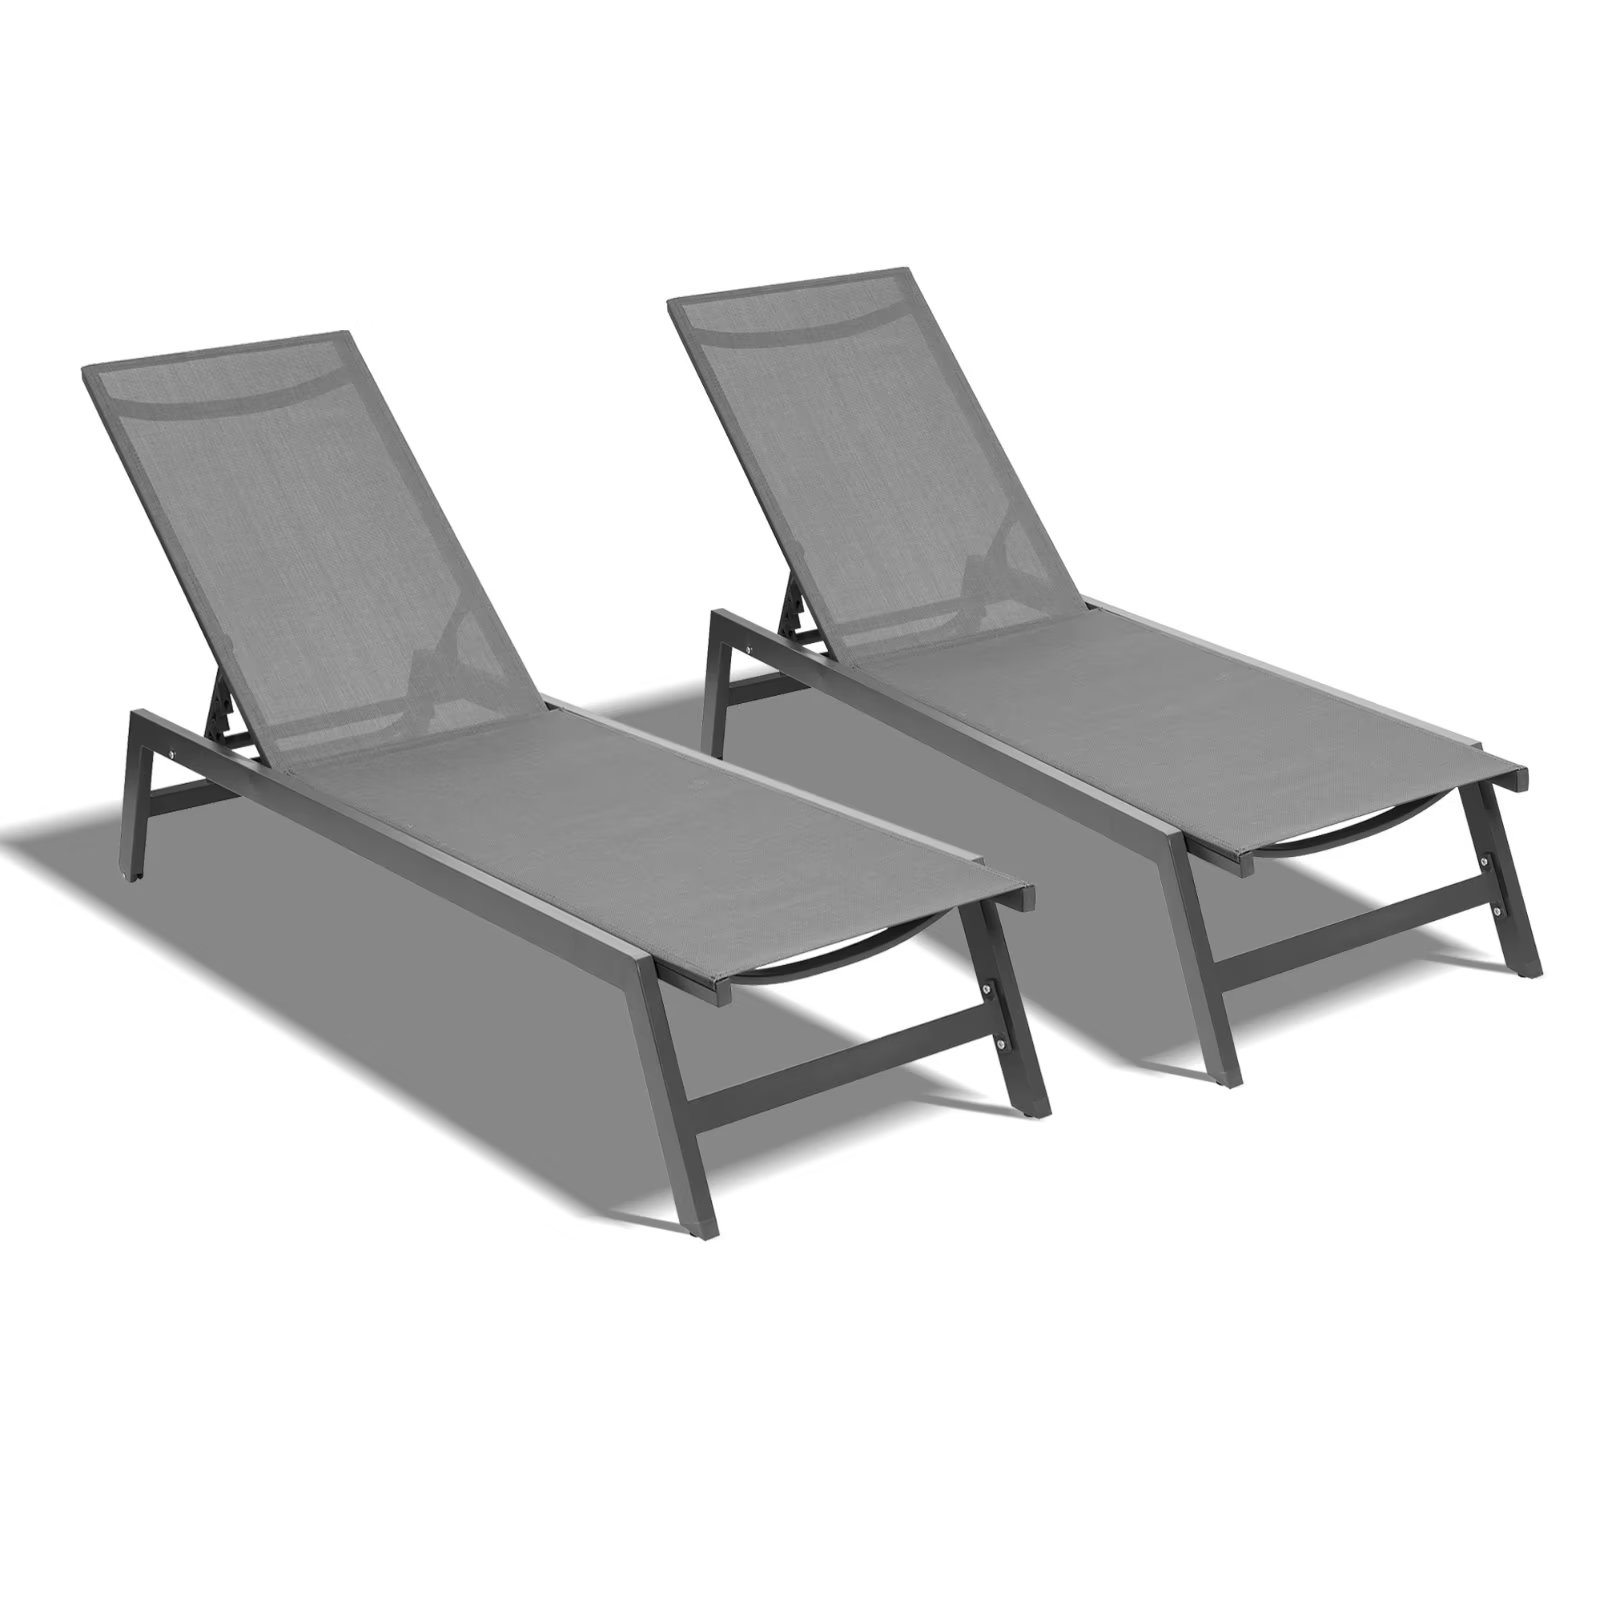 2 Pieces Patio Lounge Chair Set, Patio Chaise Lounges with Thickened Cushion, All Weather Adjustable Lounge Chair Set for Patio Backyard Porch Garden Poolside, Khaki - image 4 of 7